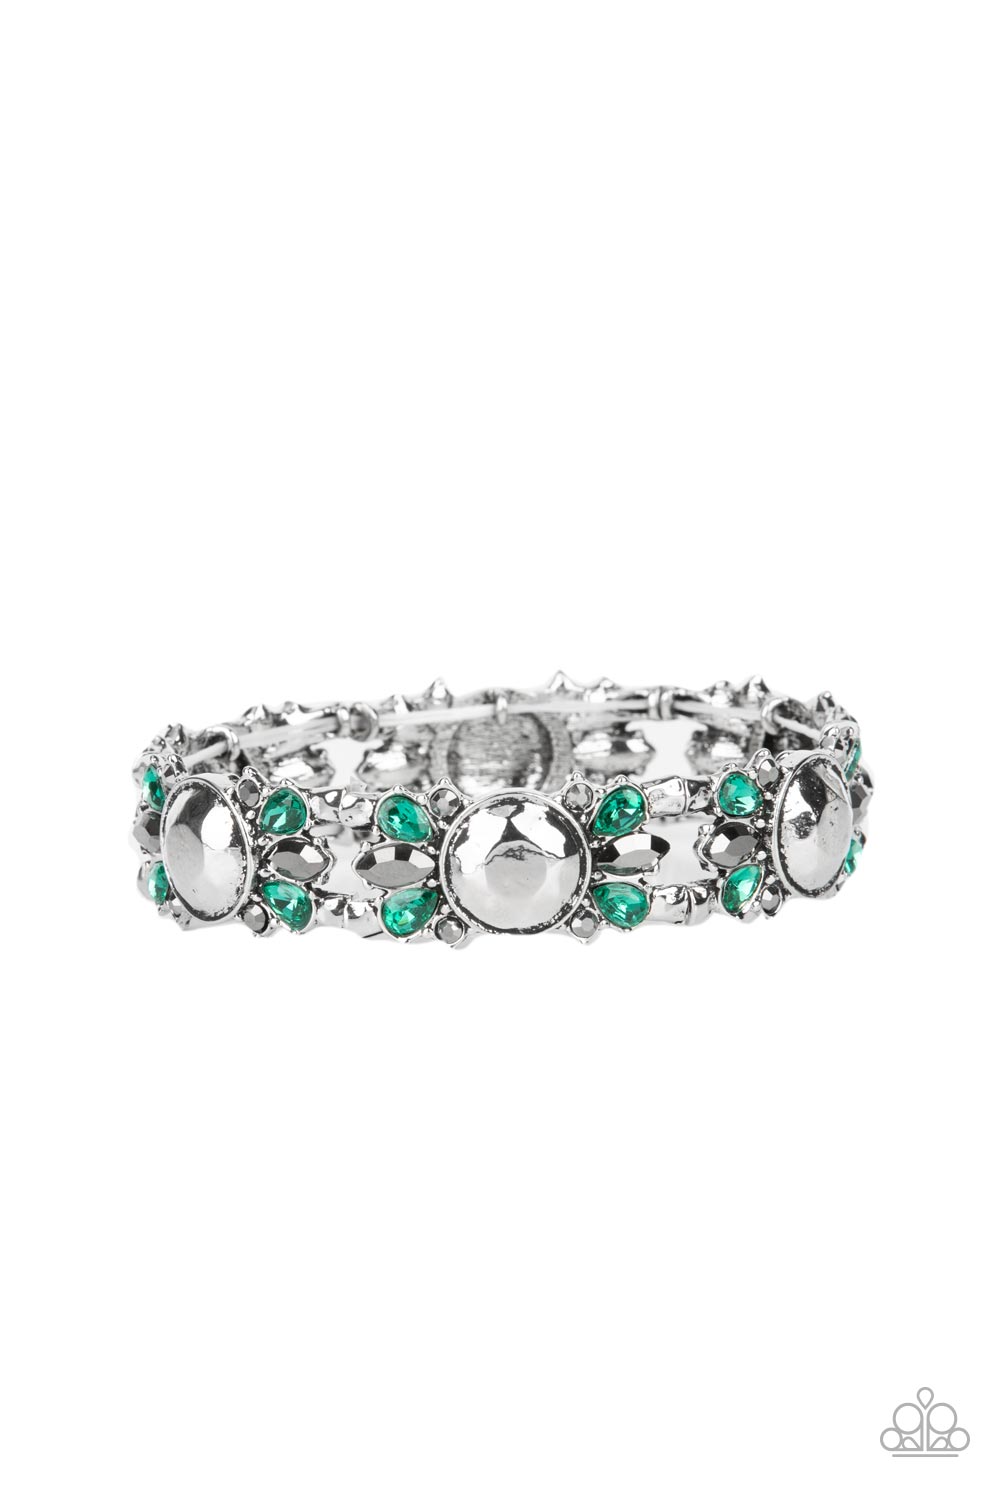 Paparazzi Definitively Diva - Green Bracelet - A Finishing Touch Jewelry